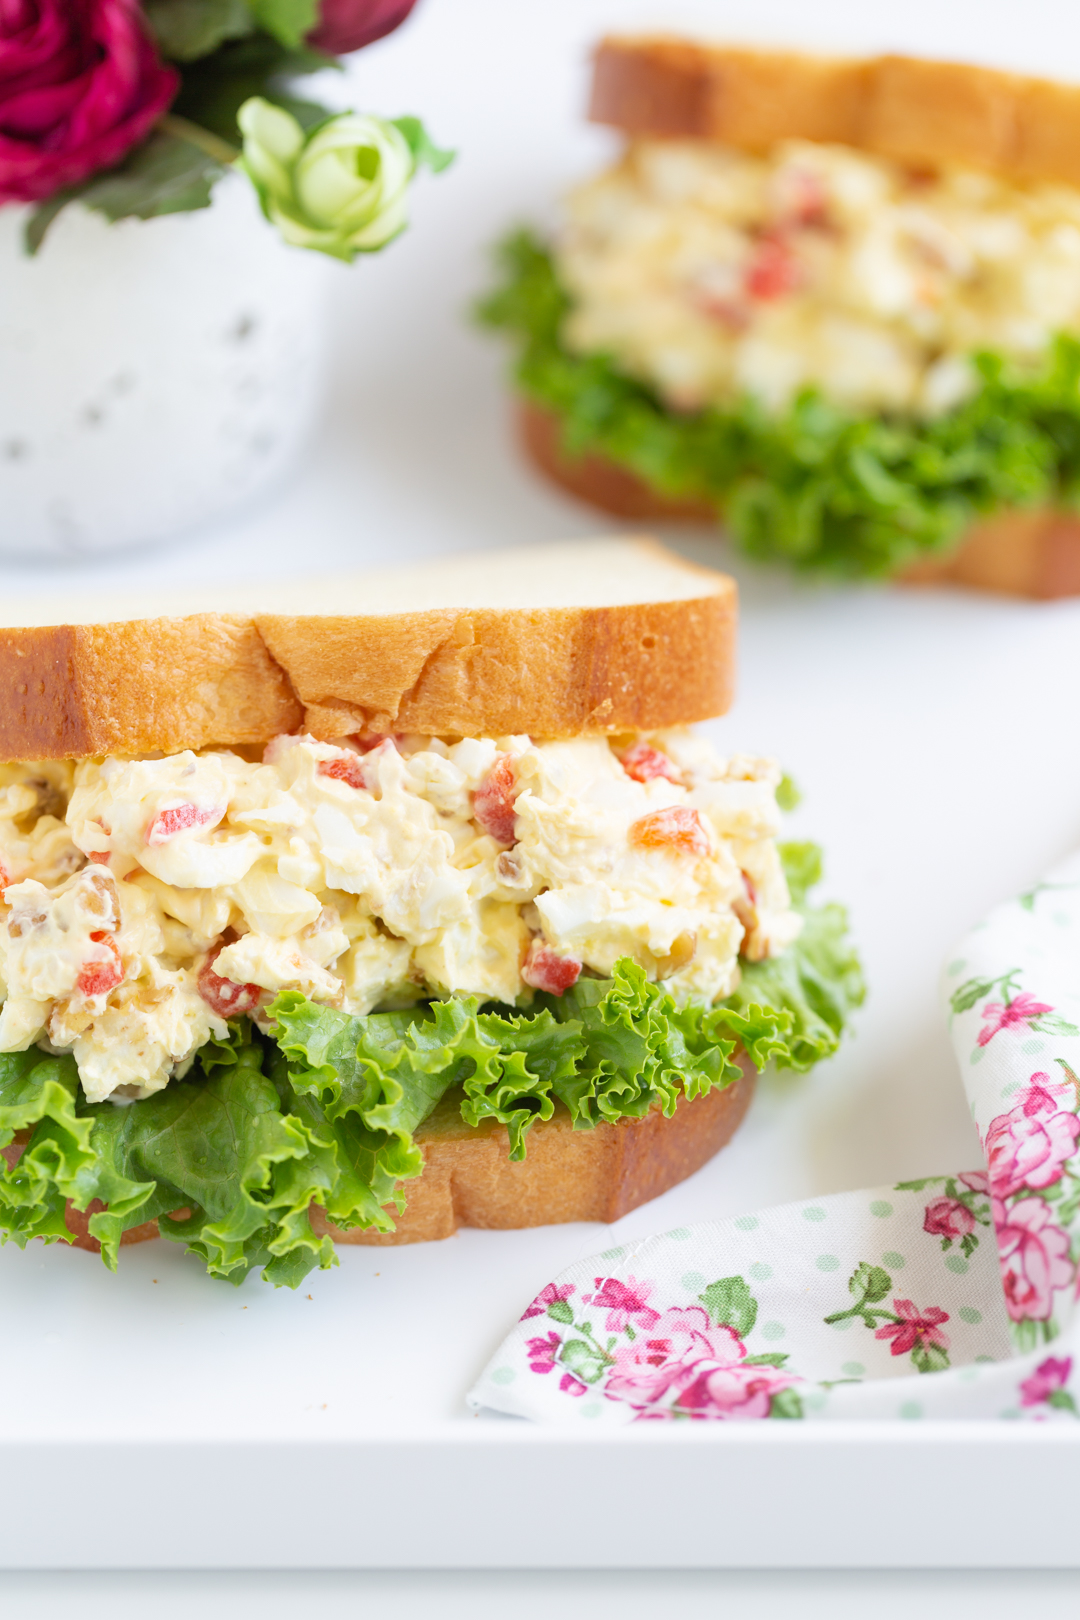 egg salad stuffed into white sliced bread and lined with green leaf lettuce